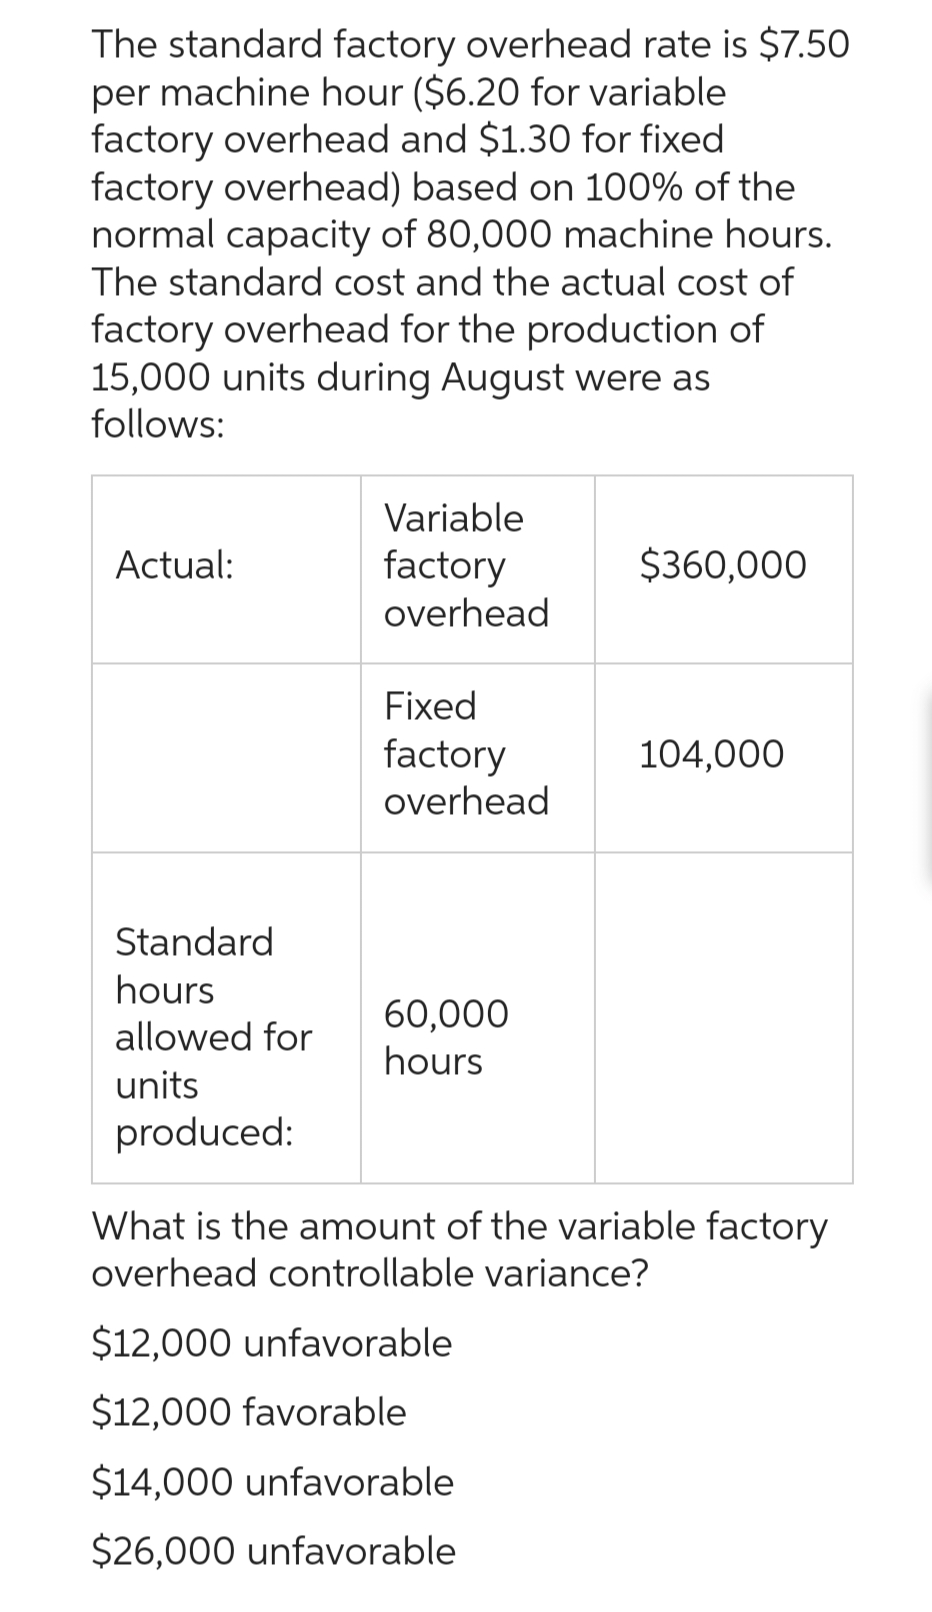 The standard factory overhead rate is $7.50
per machine hour ($6.20 for variable
factory overhead and $1.30 for fixed
factory overhead) based on 100% of the
normal capacity of 80,000 machine hours.
The standard cost and the actual cost of
factory overhead for the production of
15,000 units during August were as
follows:
Actual:
Standard
hours
allowed for
units
produced:
Variable
factory
overhead
Fixed
factory
overhead
60,000
hours
$360,000
104,000
What is the amount of the variable factory
overhead controllable variance?
$12,000 unfavorable
$12,000 favorable
$14,000 unfavorable
$26,000 unfavorable